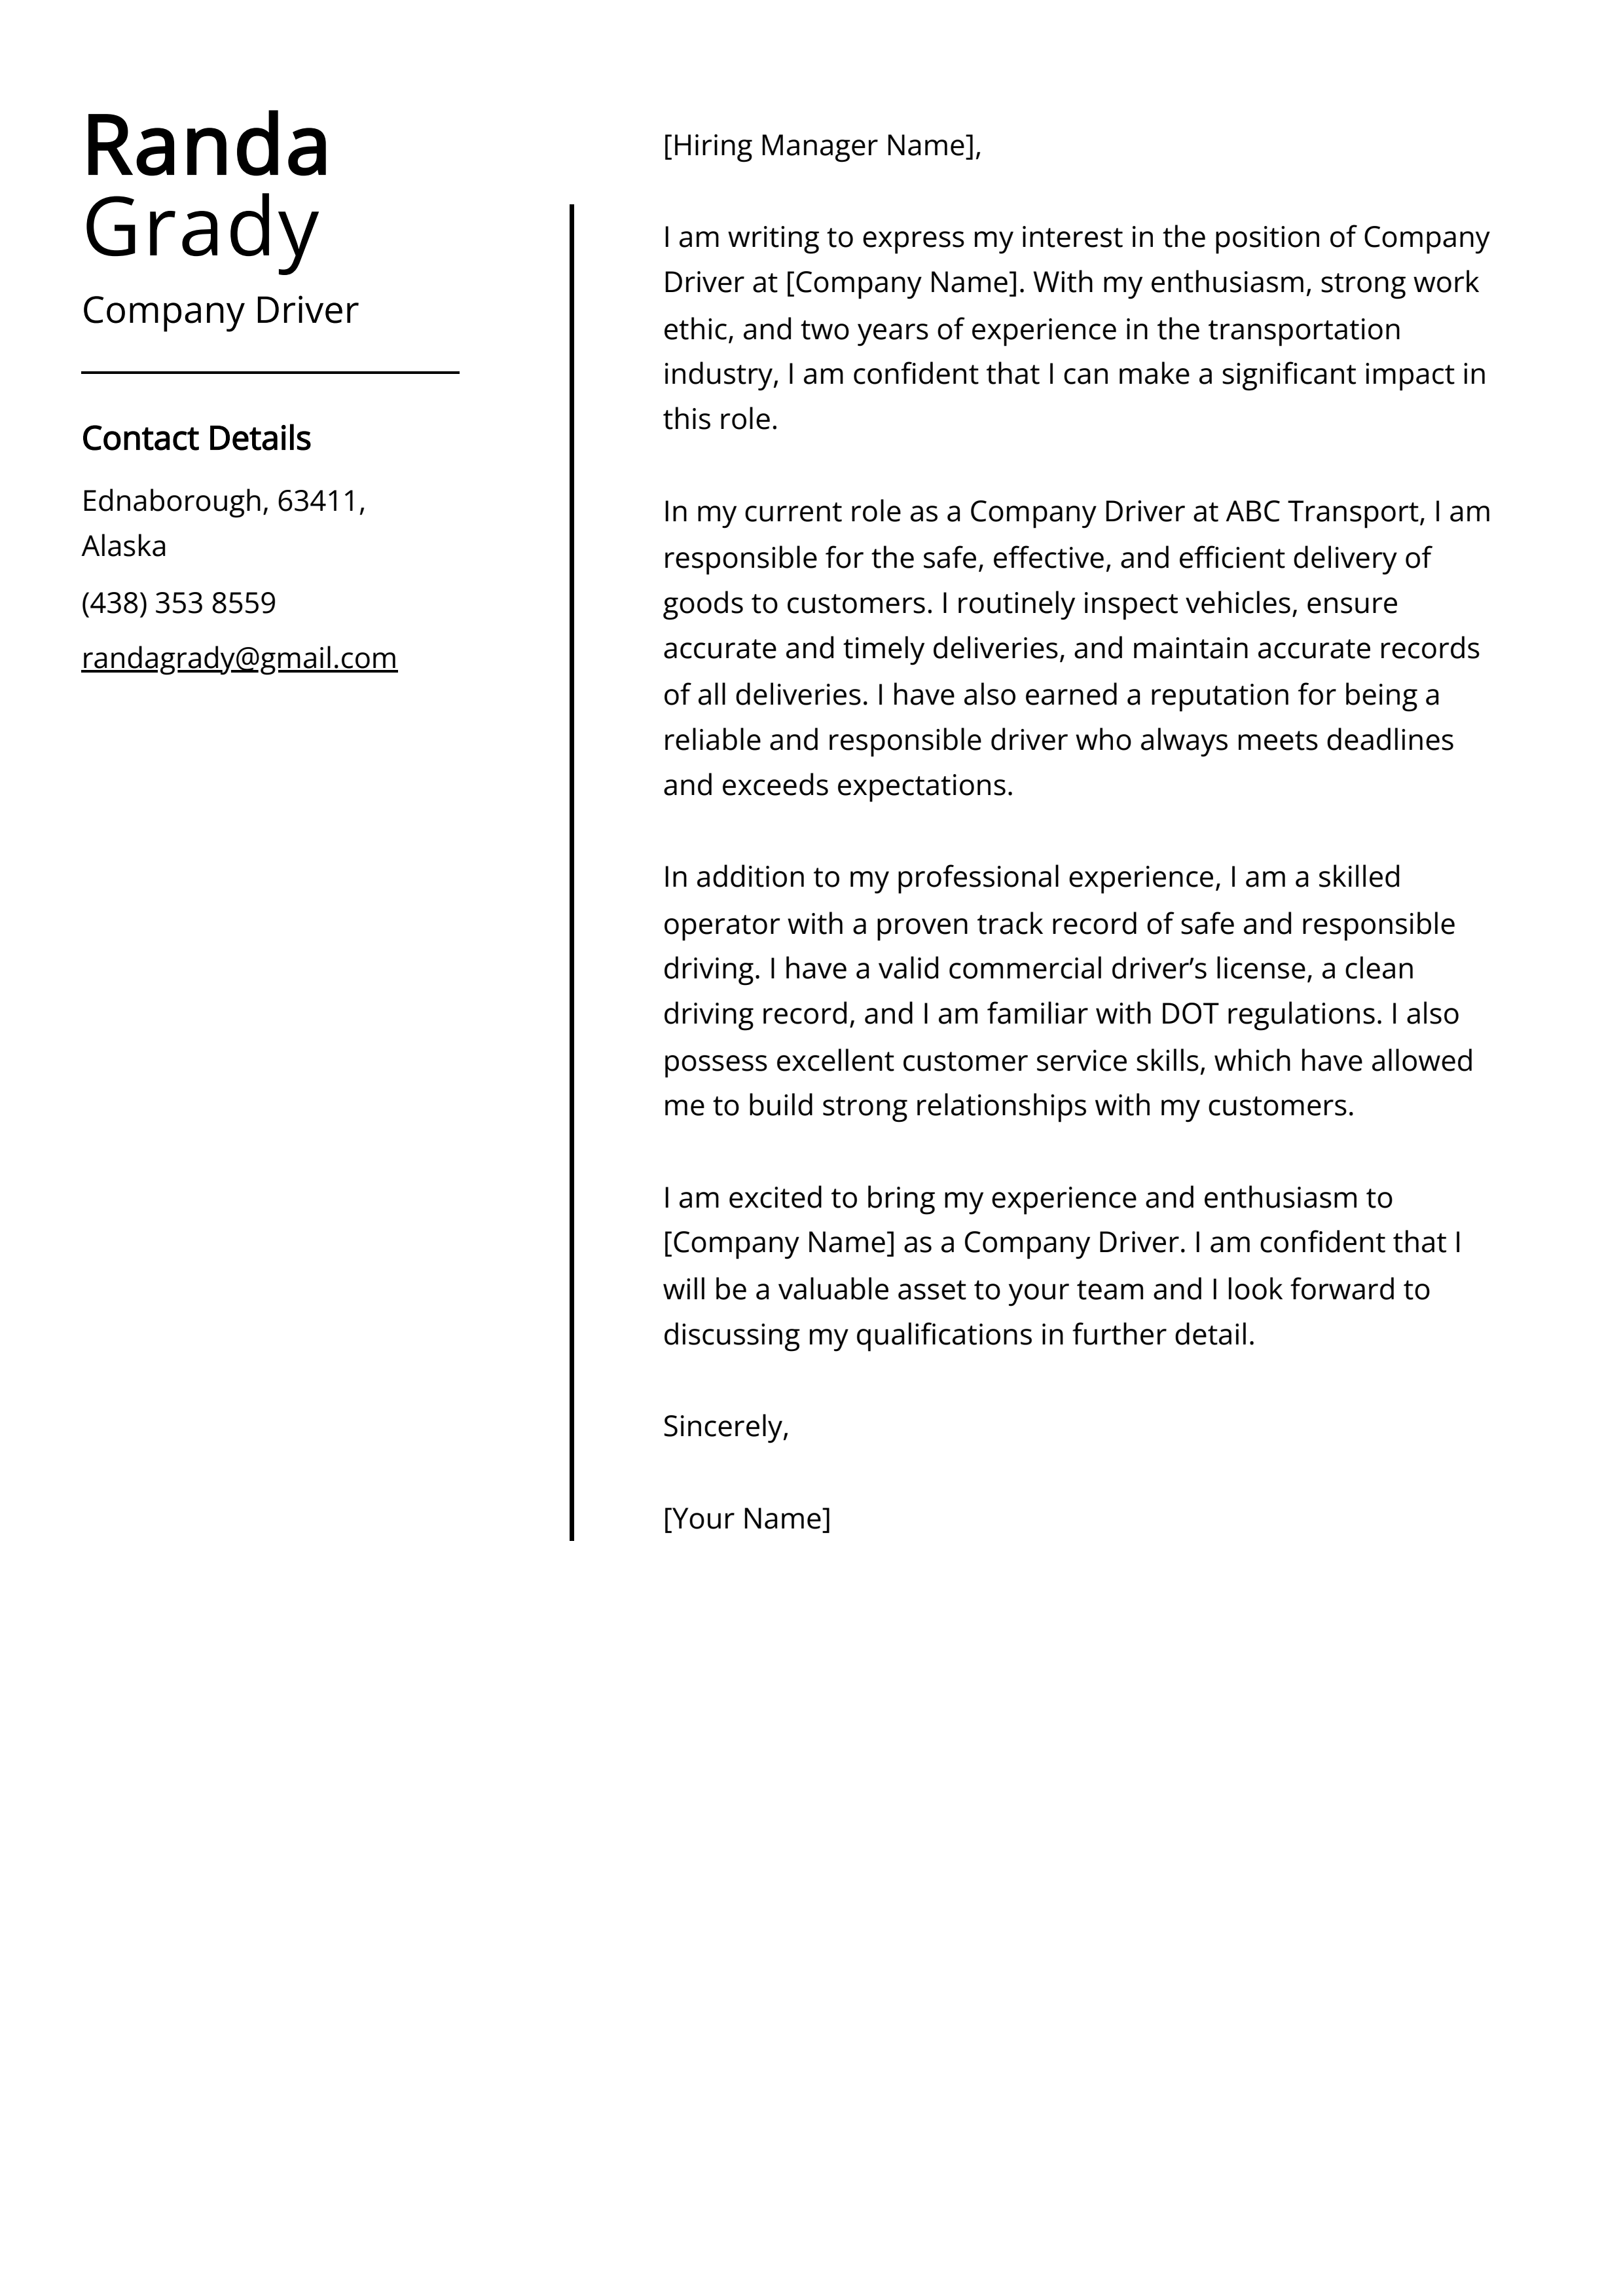 Company Driver Cover Letter Example